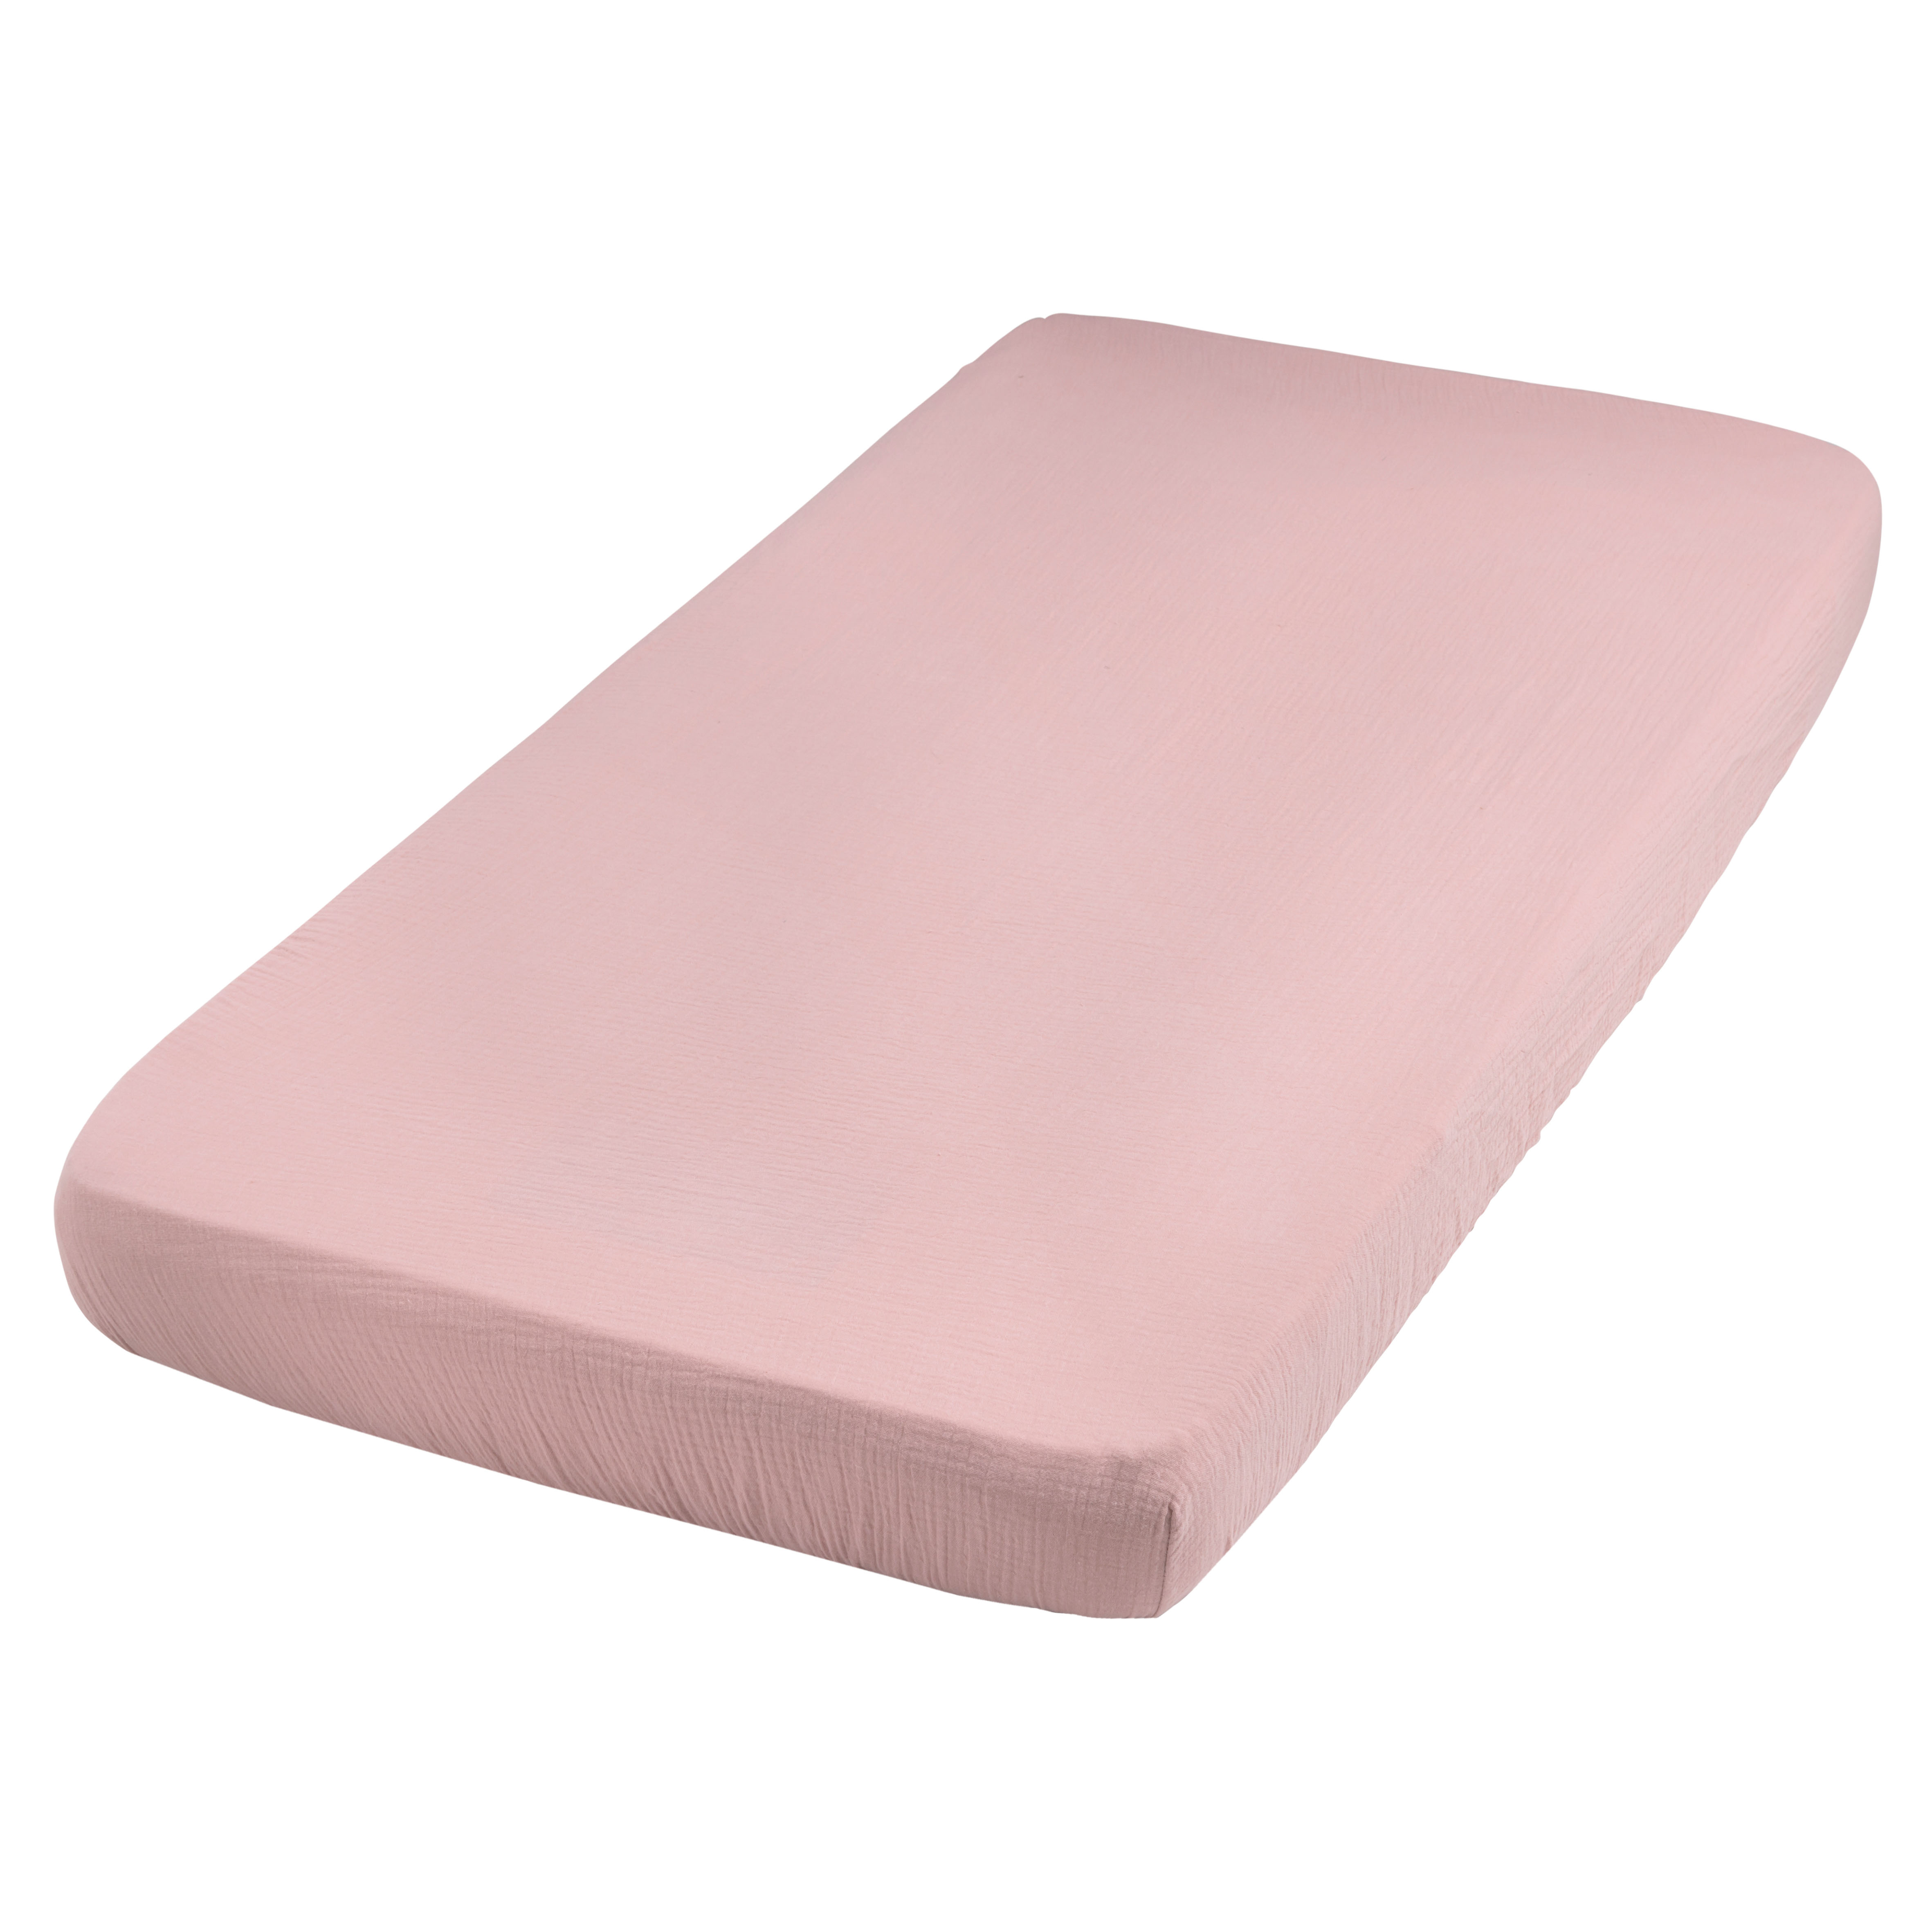 Fitted sheet Breeze old pink - 60x120